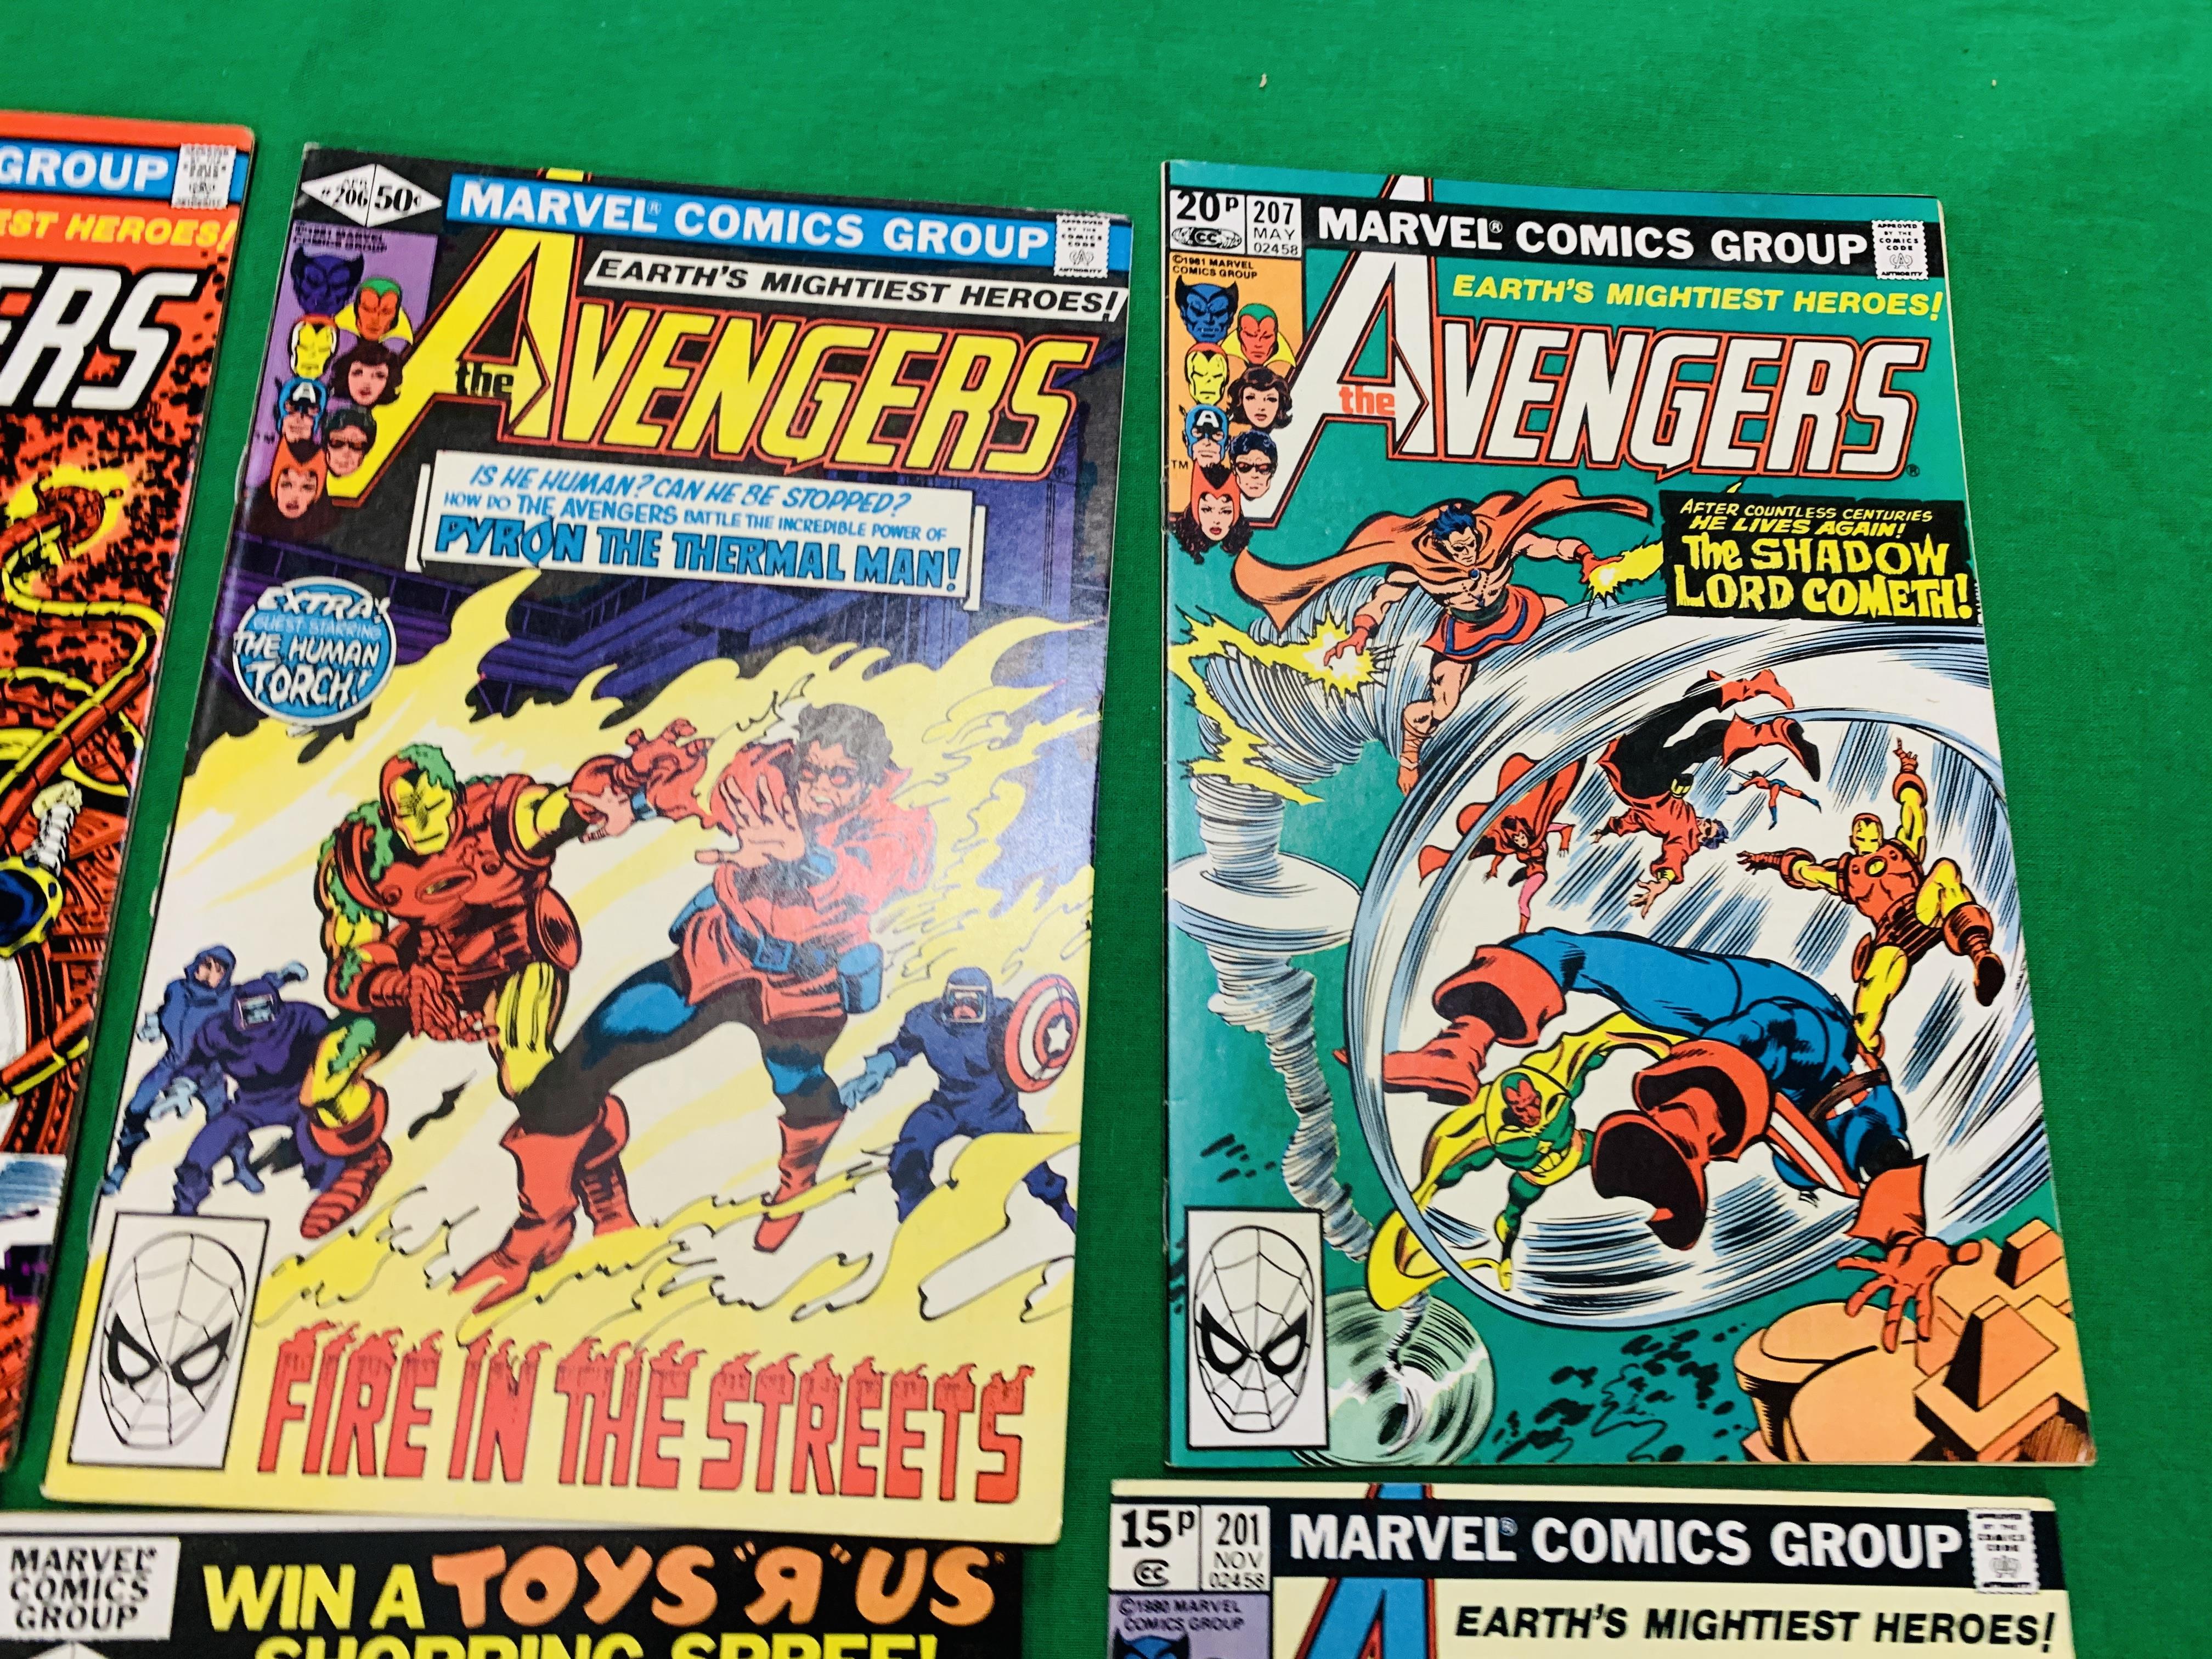 MARVEL COMICS THE AVENGERS NO. 101 - 299, MISSING ISSUES 103 AND 110. - Image 74 of 130